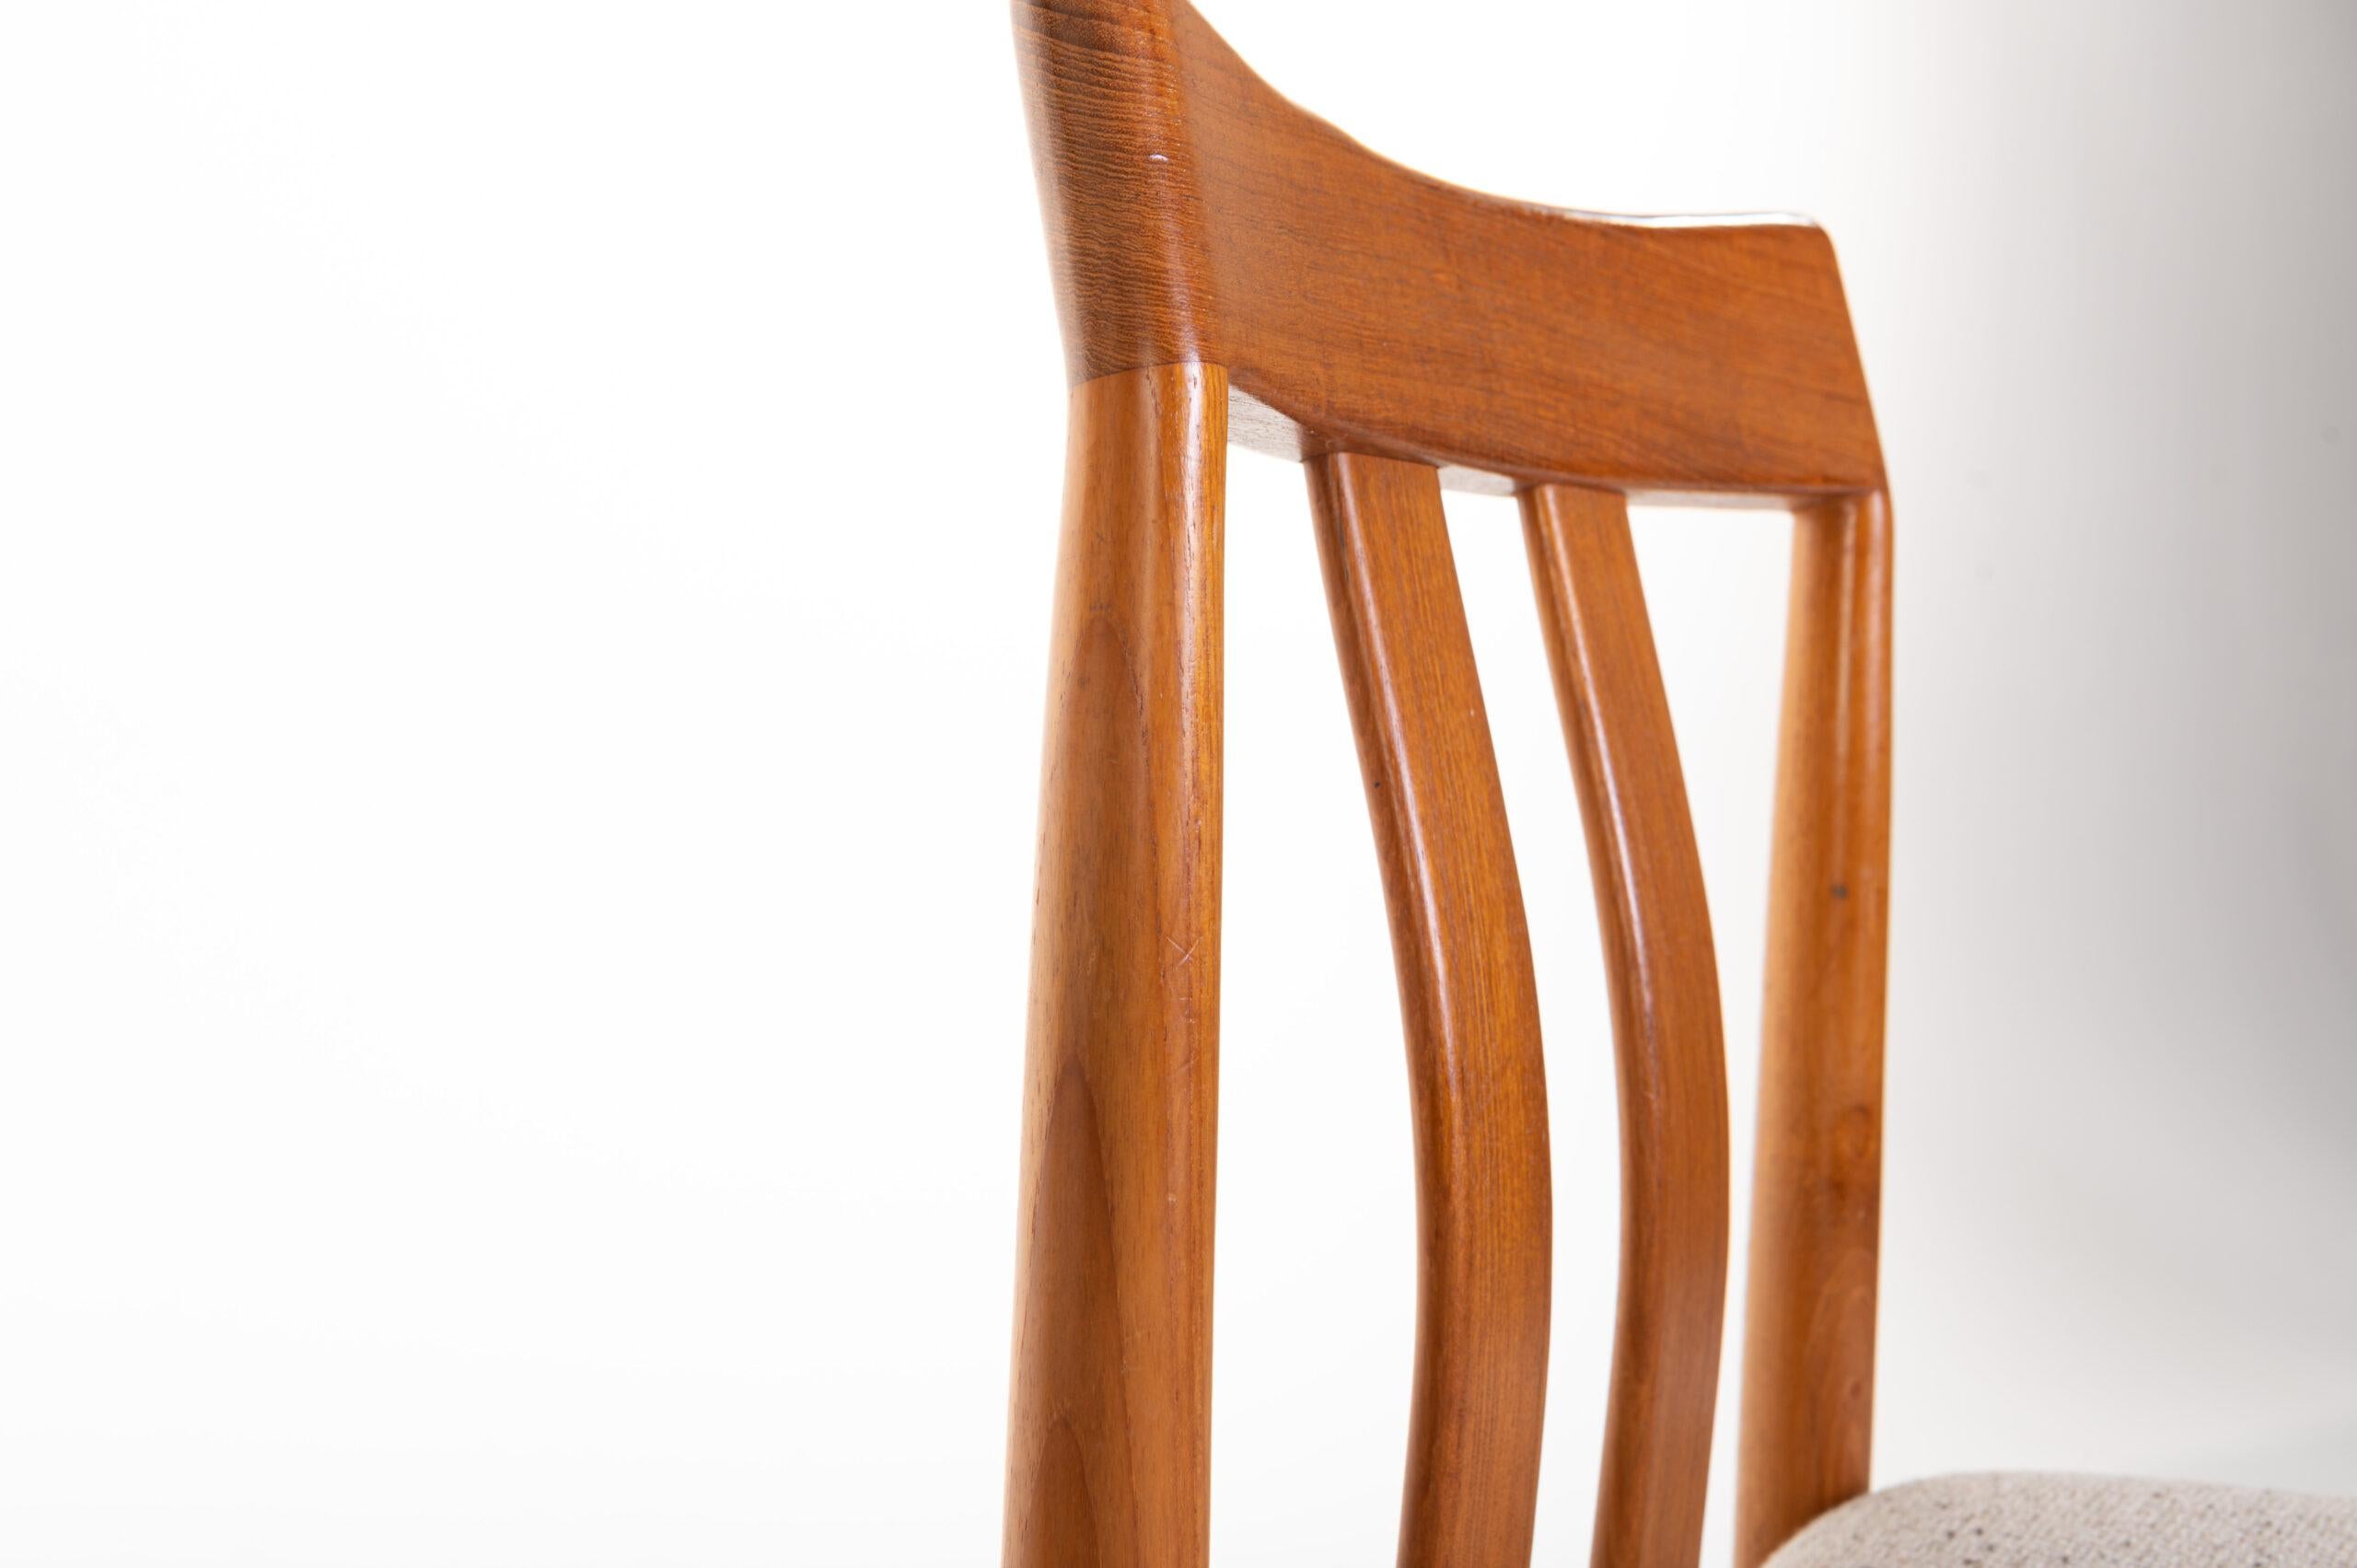 Fabric Set of 4 Teak Dining Room Chairs by Vamdrup, Denmark 1960s